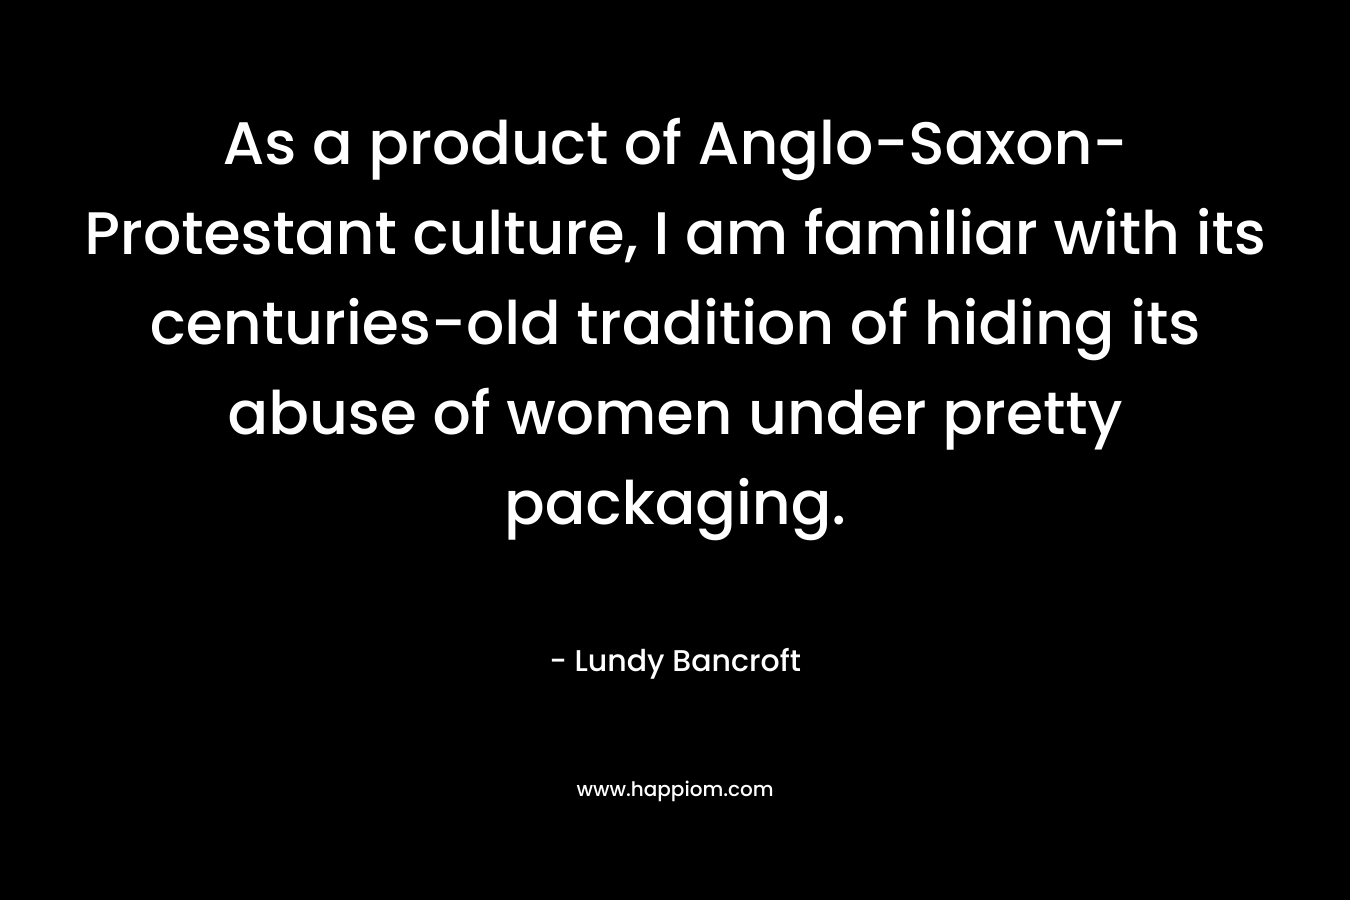 As a product of Anglo-Saxon-Protestant culture, I am familiar with its centuries-old tradition of hiding its abuse of women under pretty packaging. – Lundy Bancroft